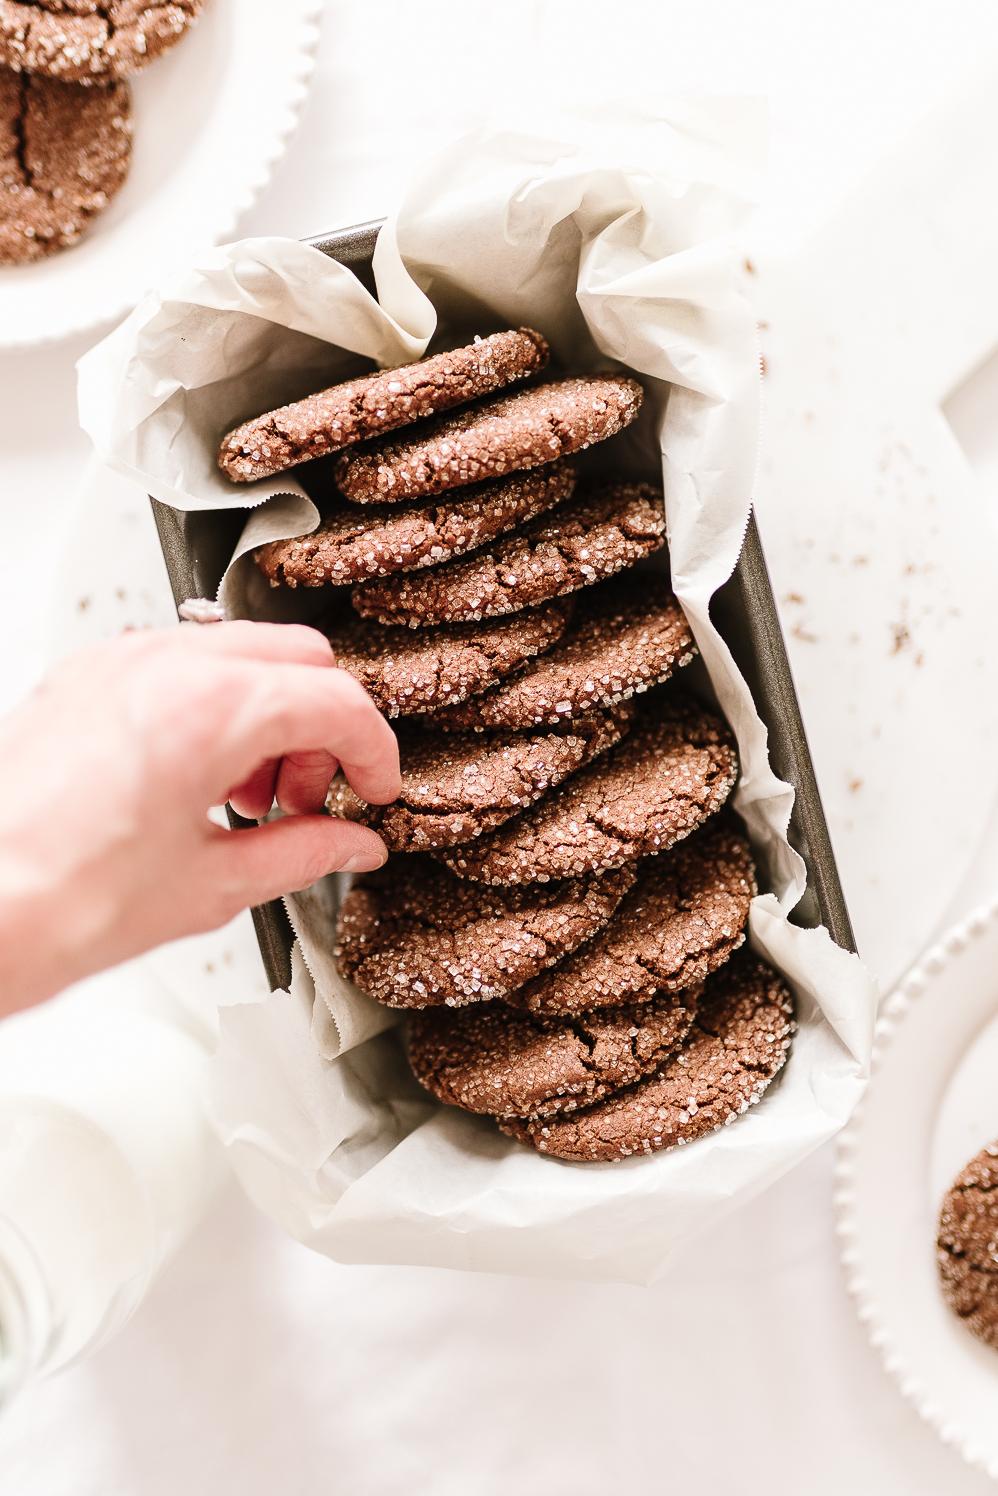  Indulge in a guilt-free treat with these gluten-free cookies.